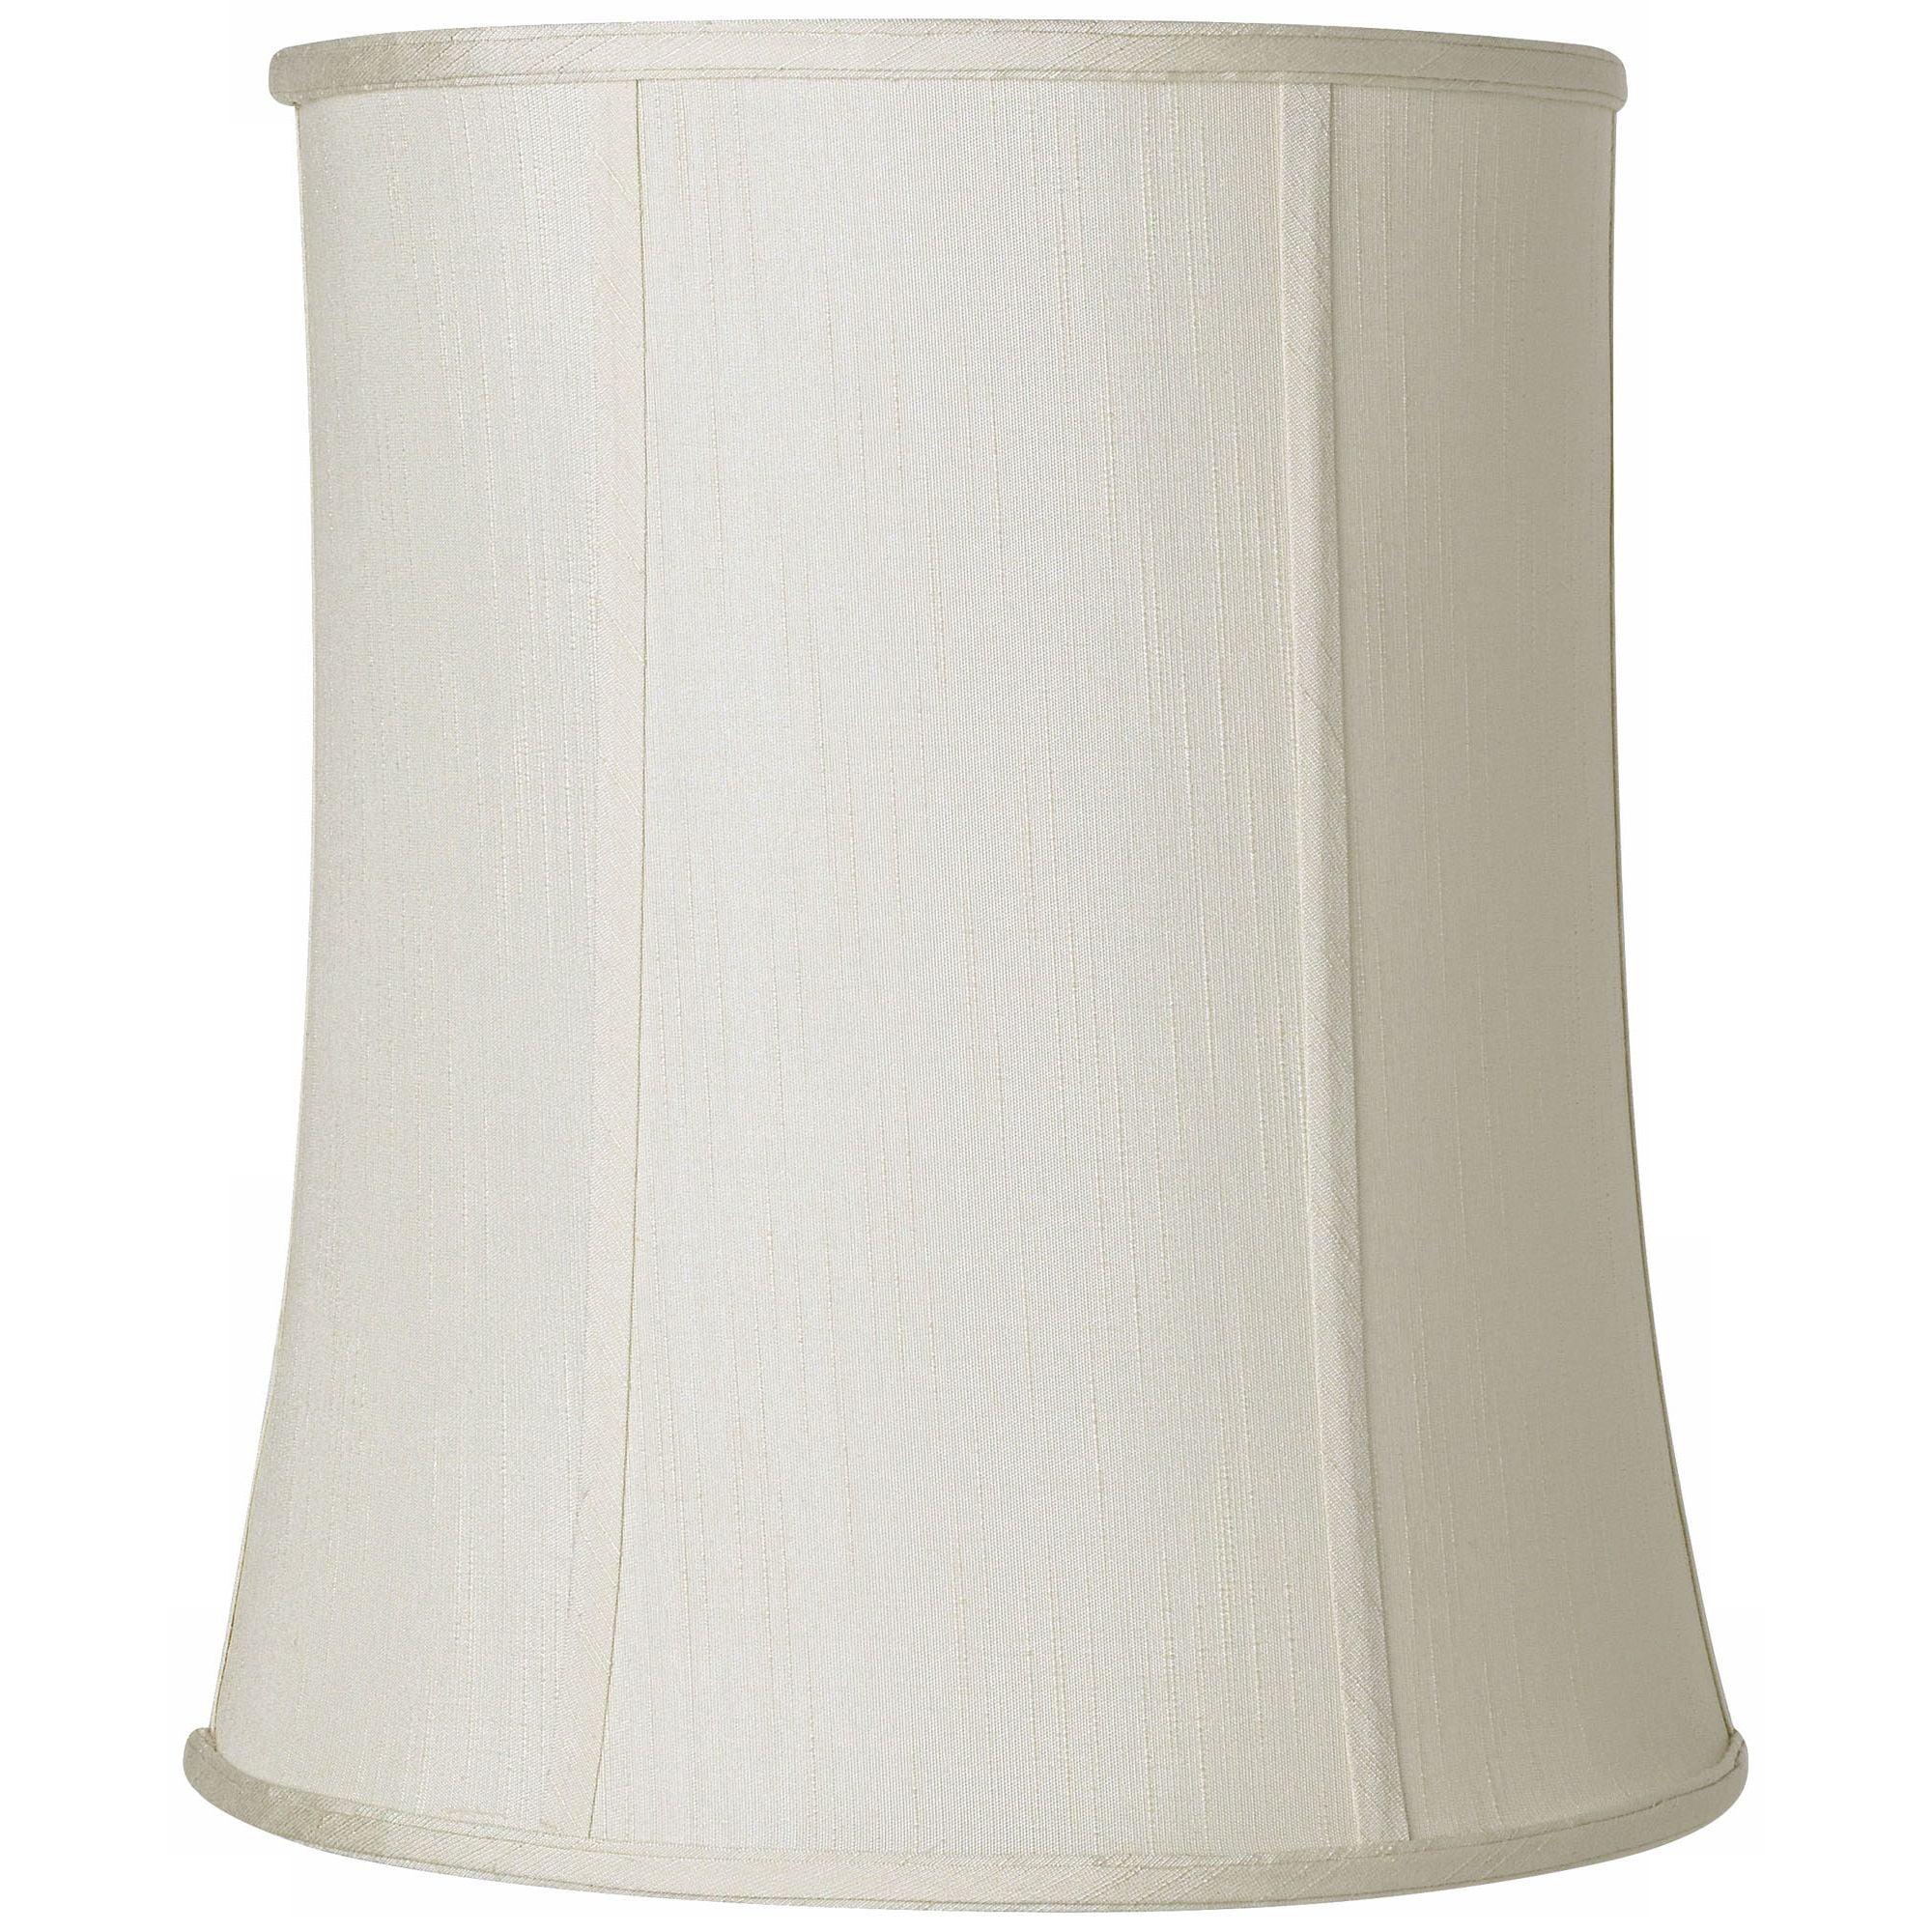 Creme 14" Deep Drum Lamp Shade with Brass Fitting